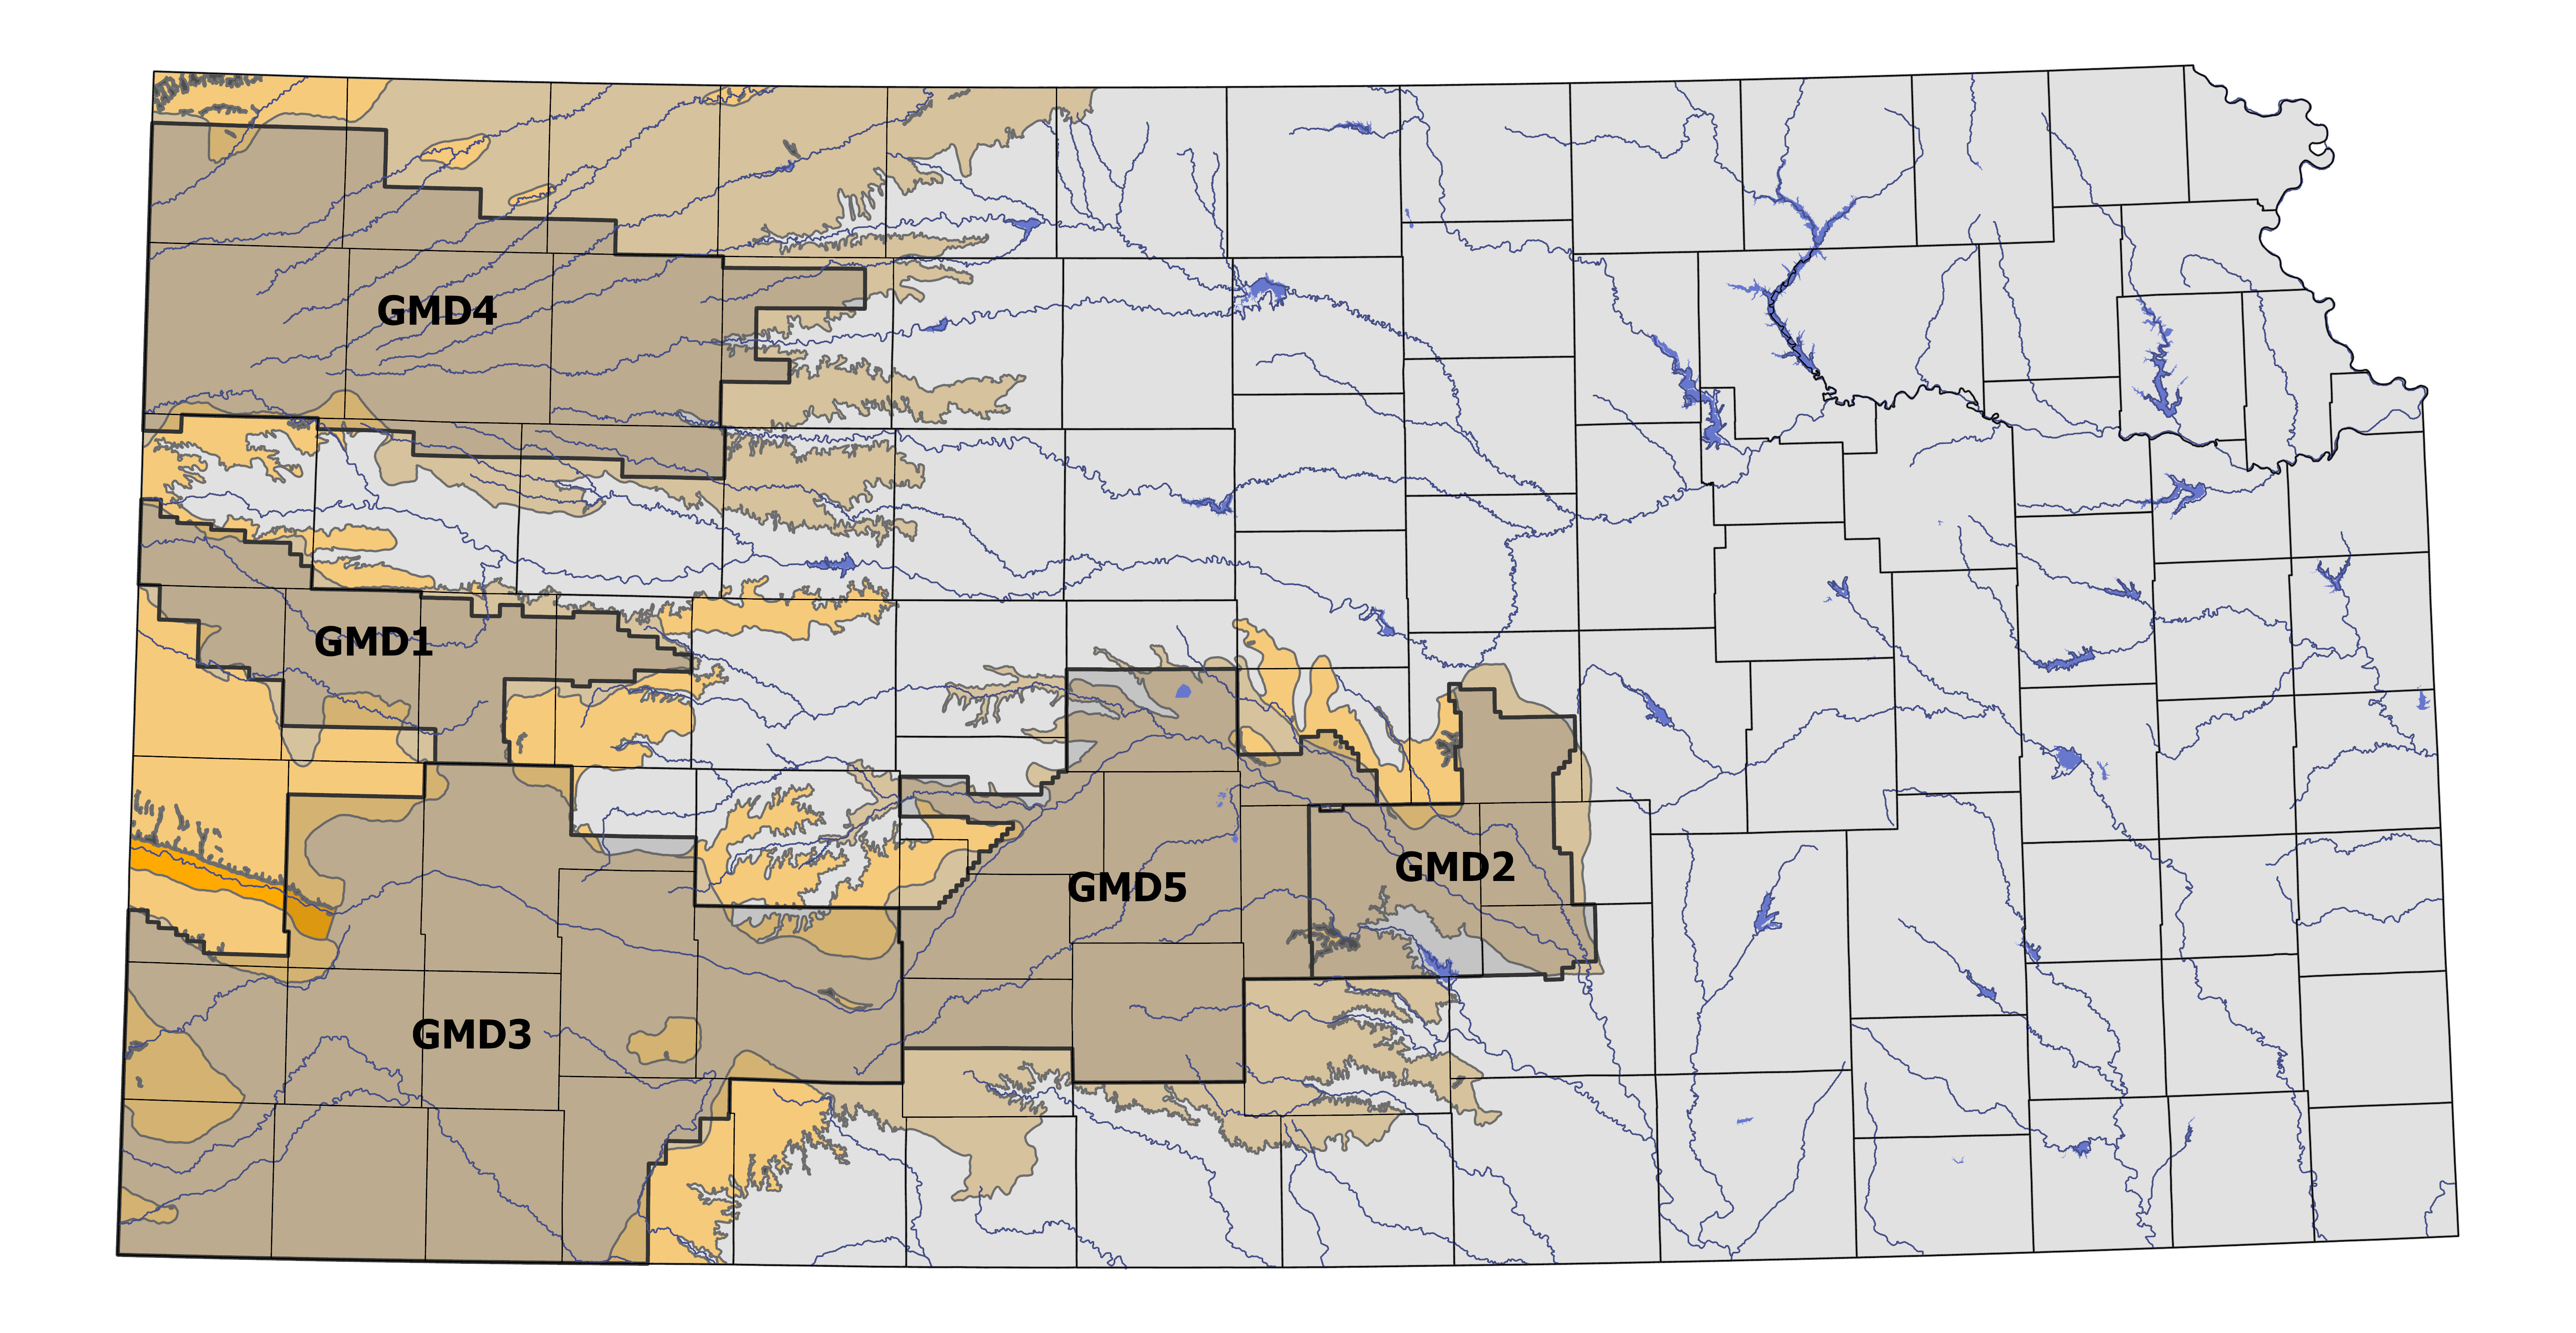 "Extent of the High Plains aquifer in Kansas and groundwater management district boundaries"